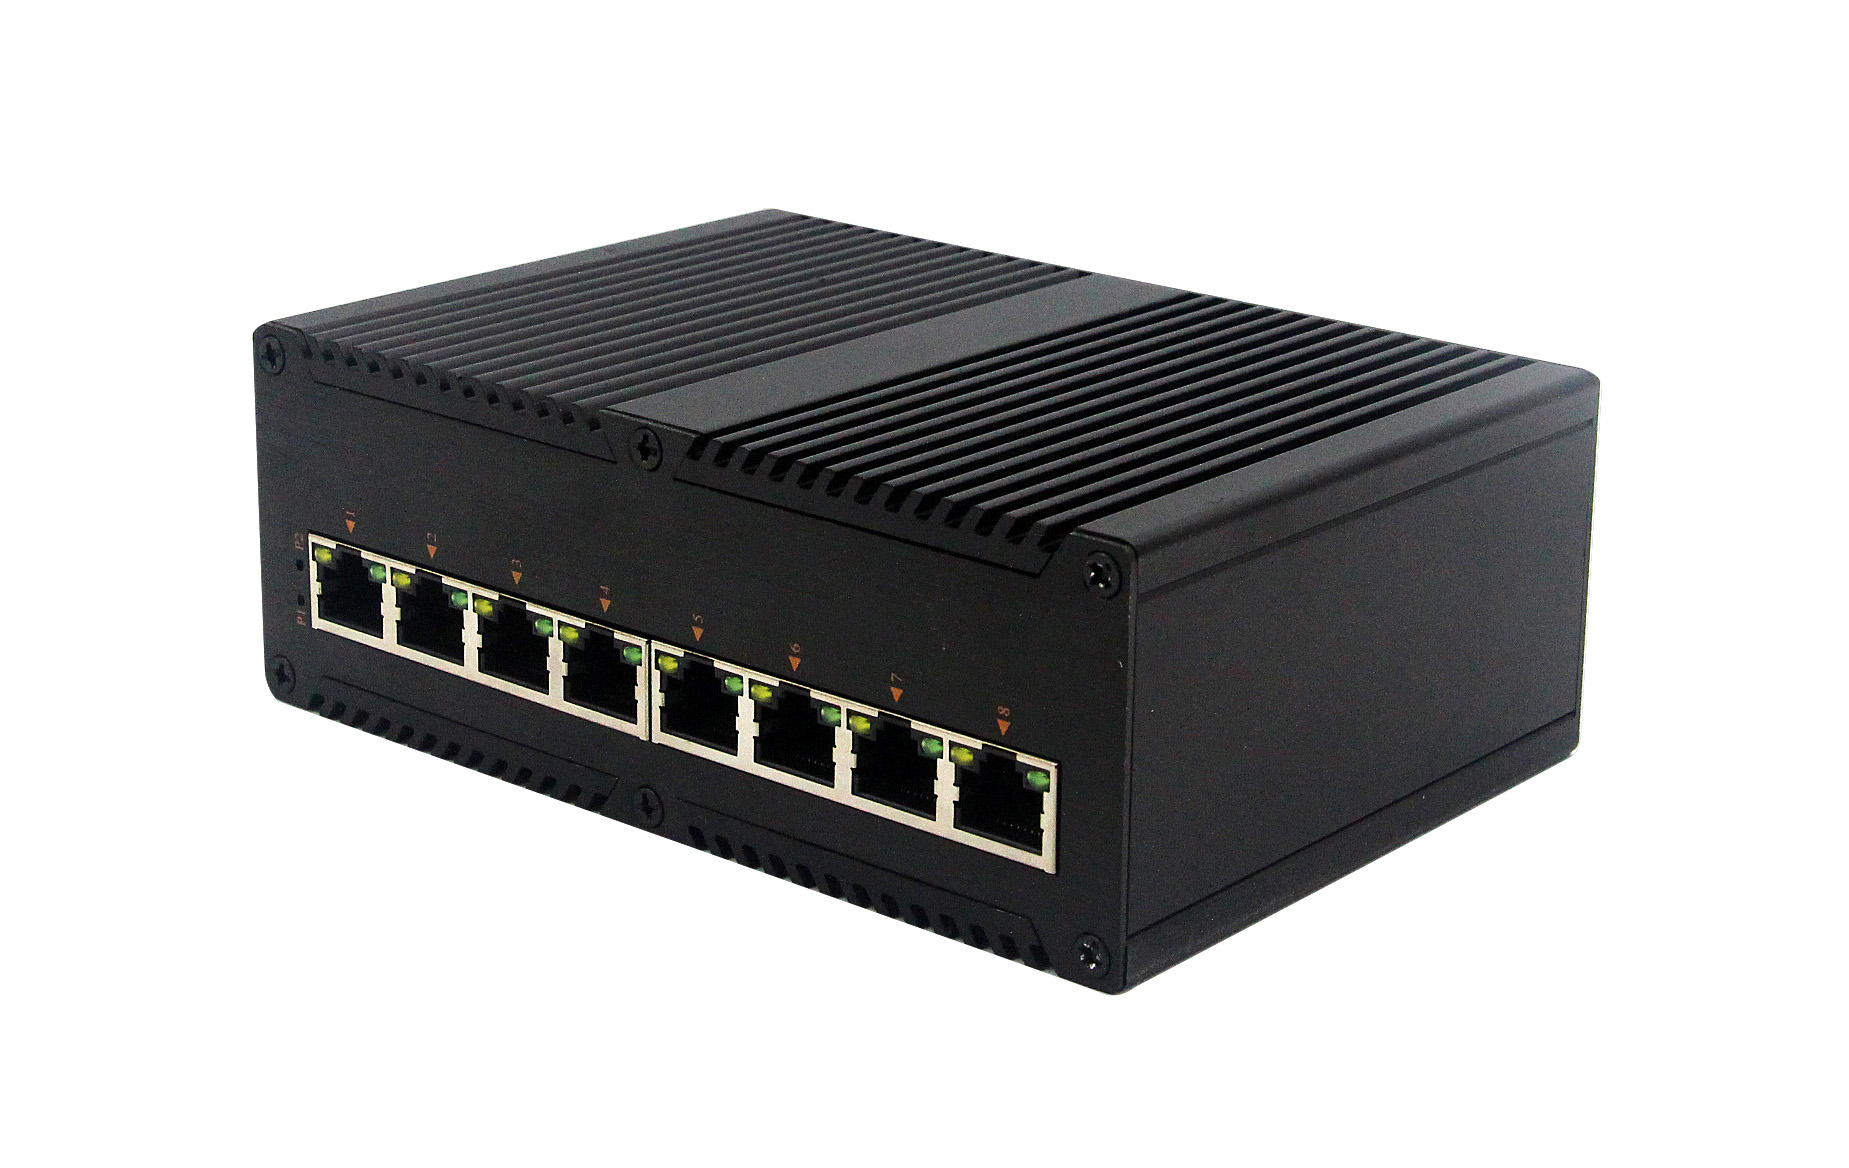 What is the difference between Level 2 and Level 3 Ethernet switch?